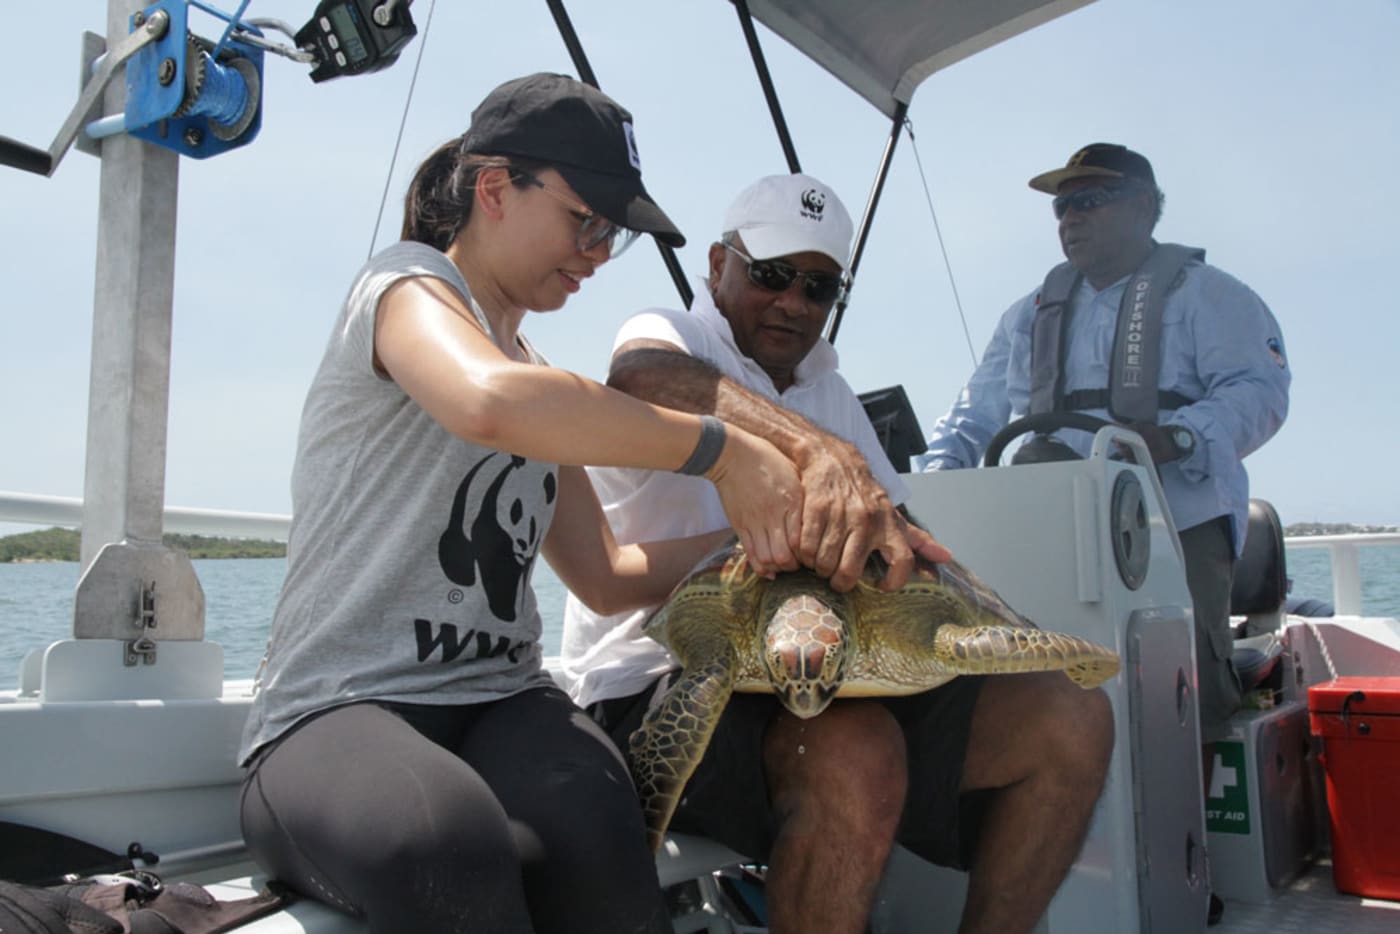 Content Producer, Leonie Sii and National Conservation on Country Manager, Cliff Cobbo with a green sea turtle